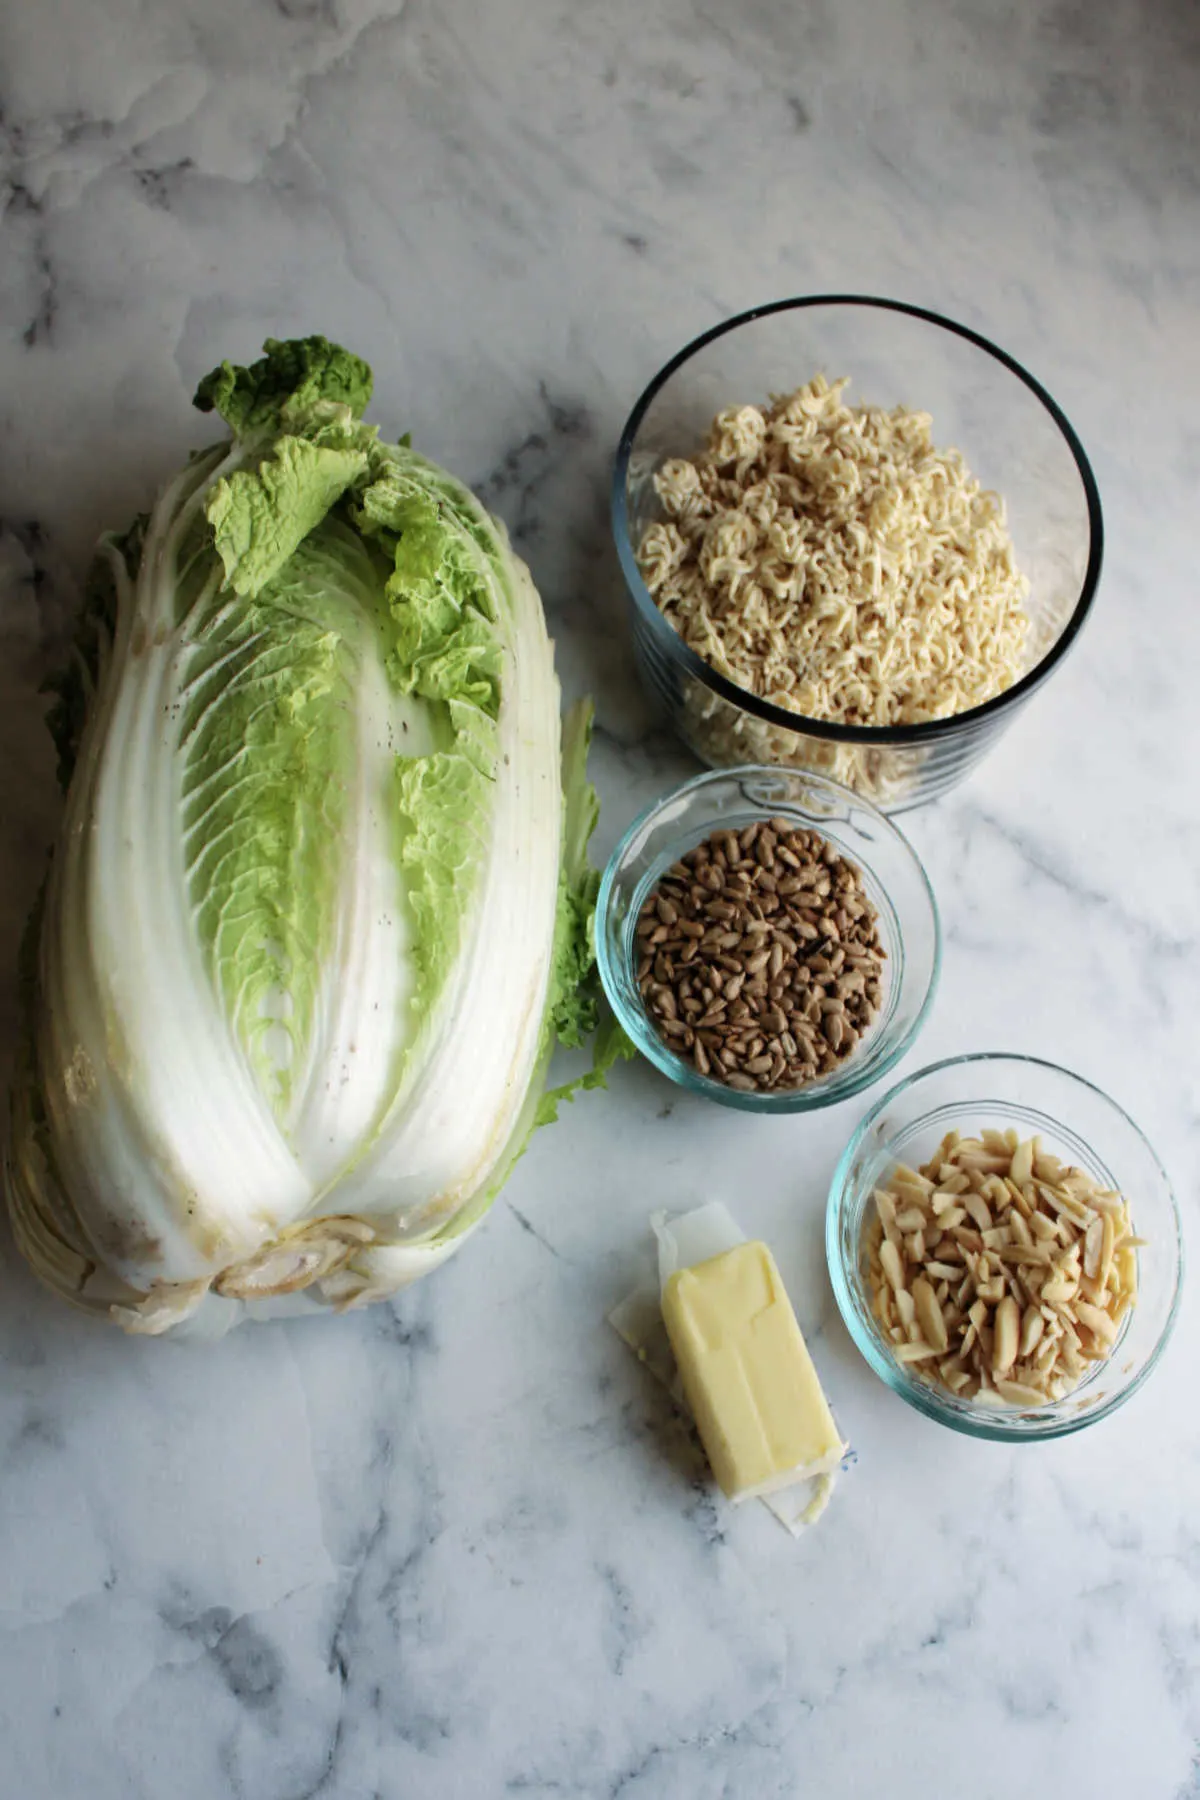 Napa cabbage, ramen noodles, sunflower seeds, slivered almonds and butter ready to be made into salad.